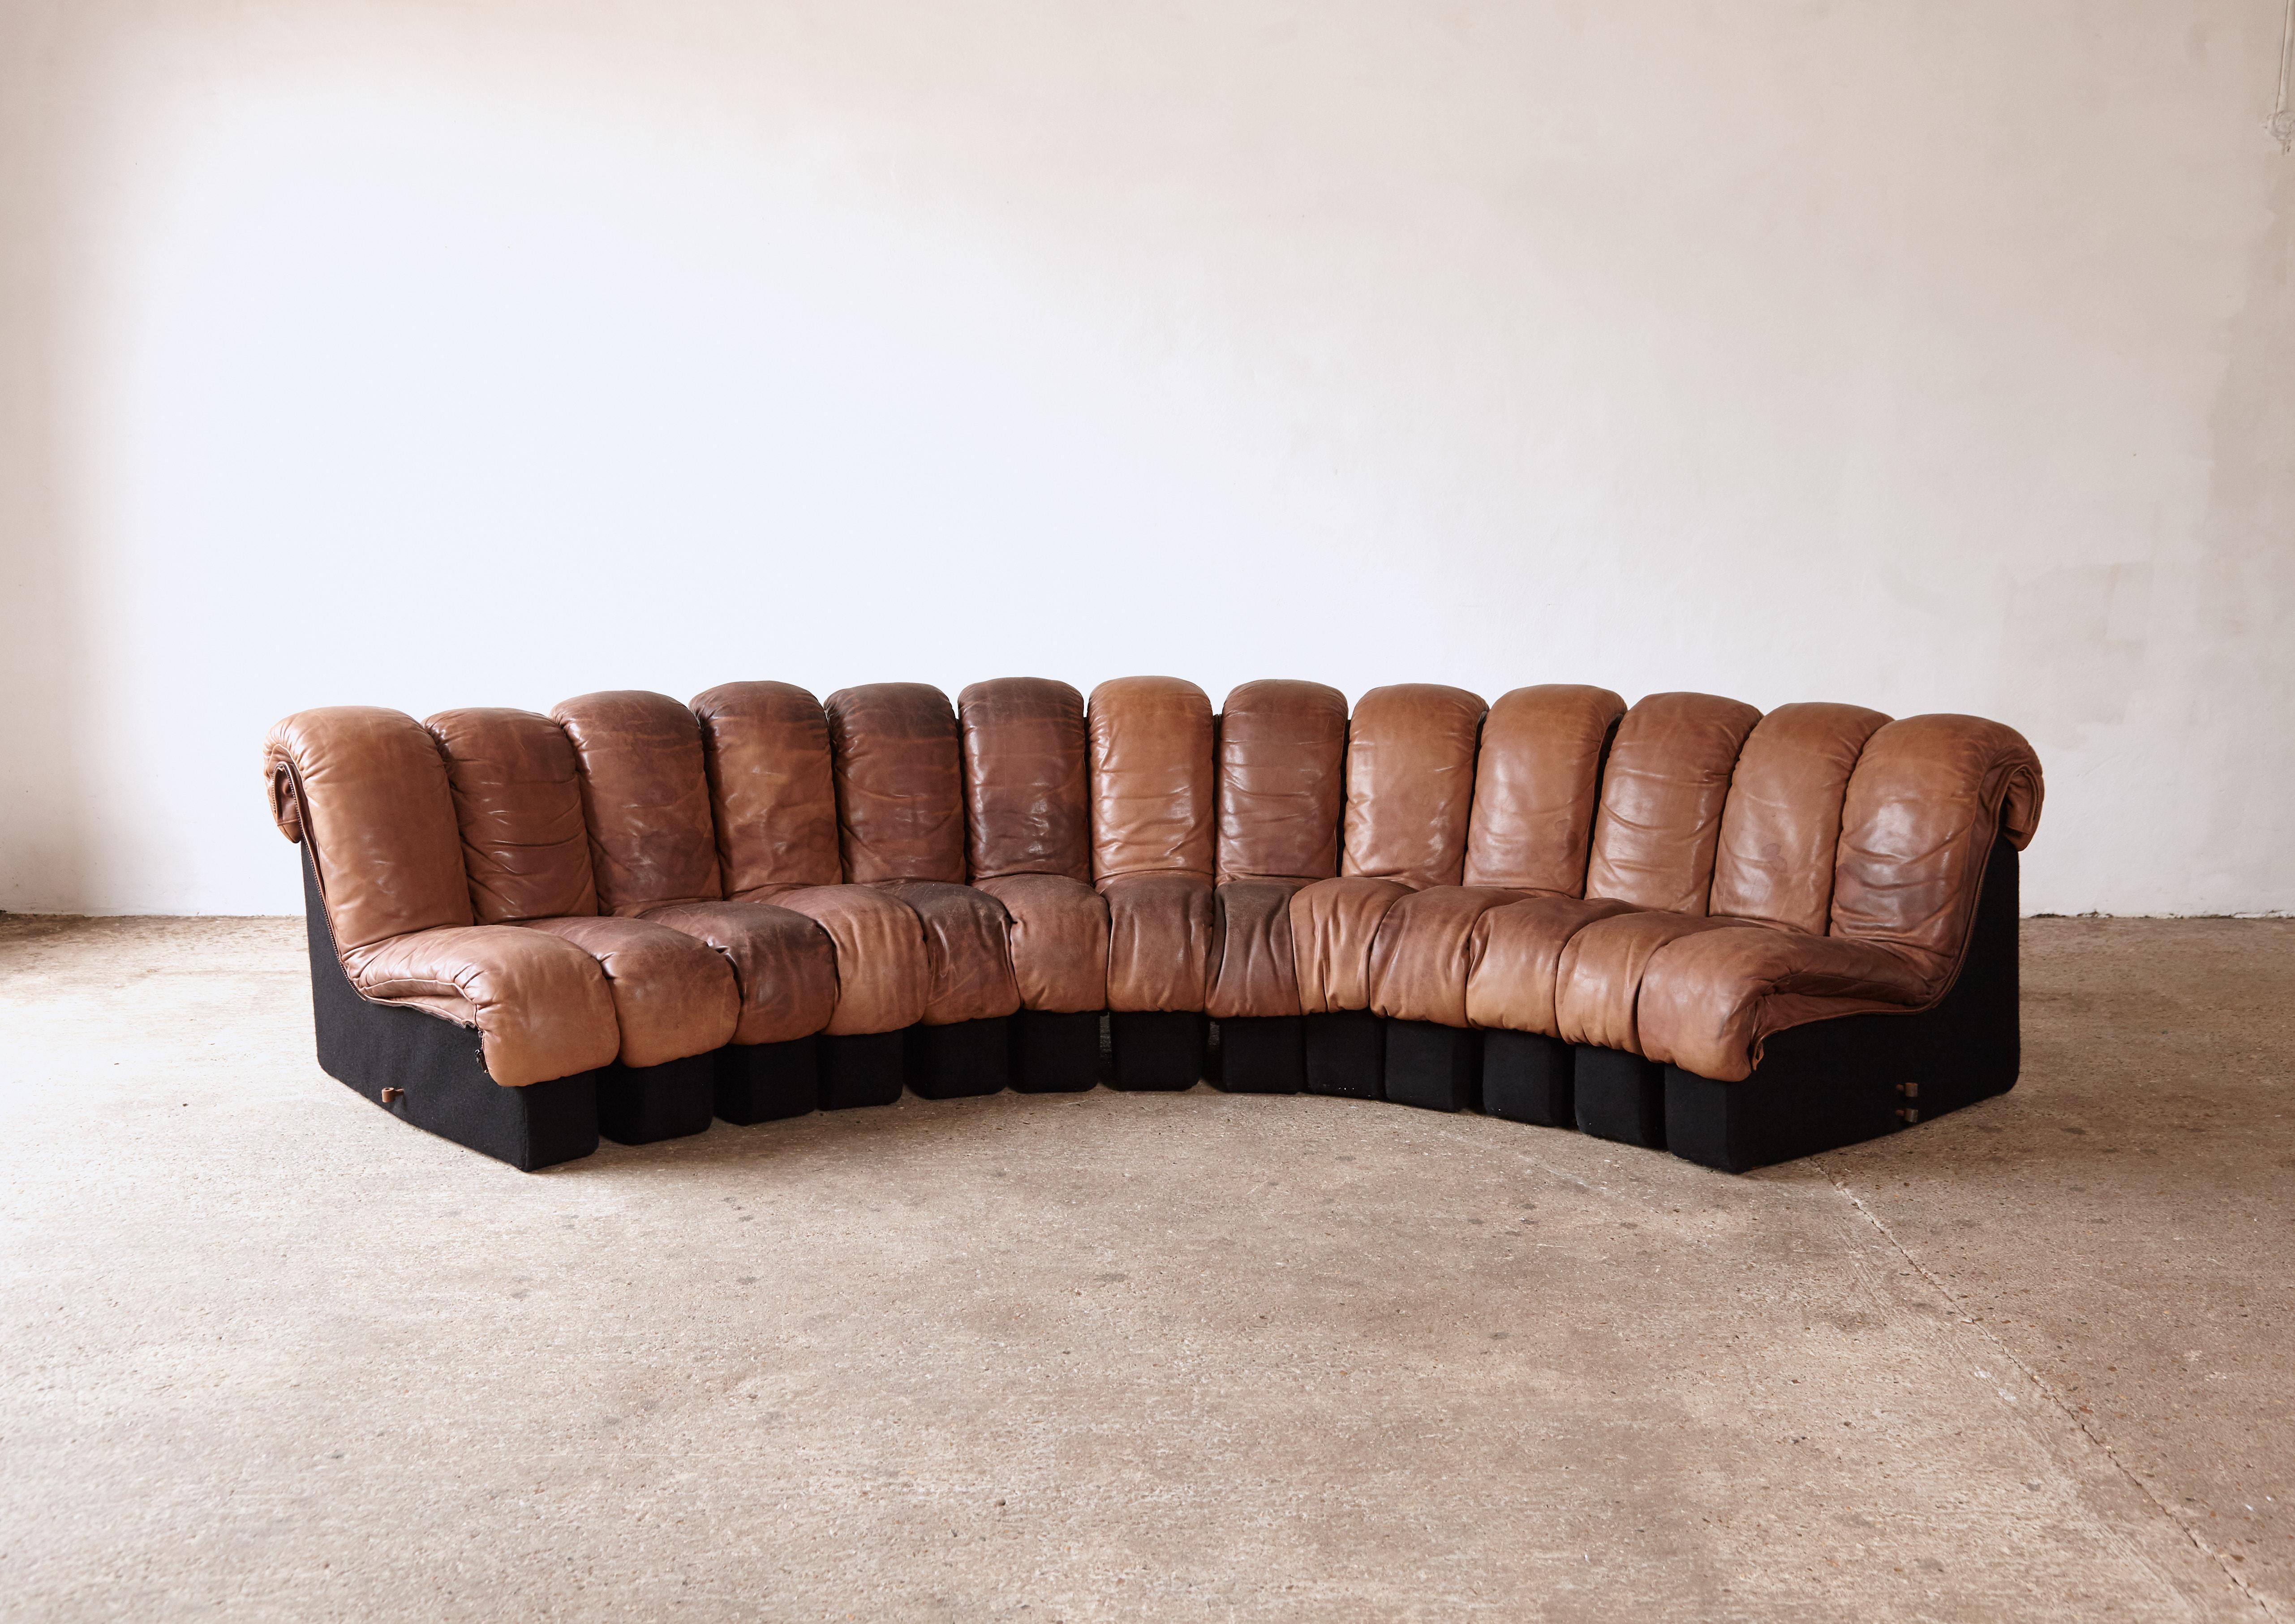 Super patinated De Sede DS-600 modular sectional non stop sofa by Heinz Ulrich, Ueli Berger and Elenora Peduzzi-Riva, 1970s, Switzerland. Original brown leather seating with felt bases. 13 elements which zip together and apart - we have additional